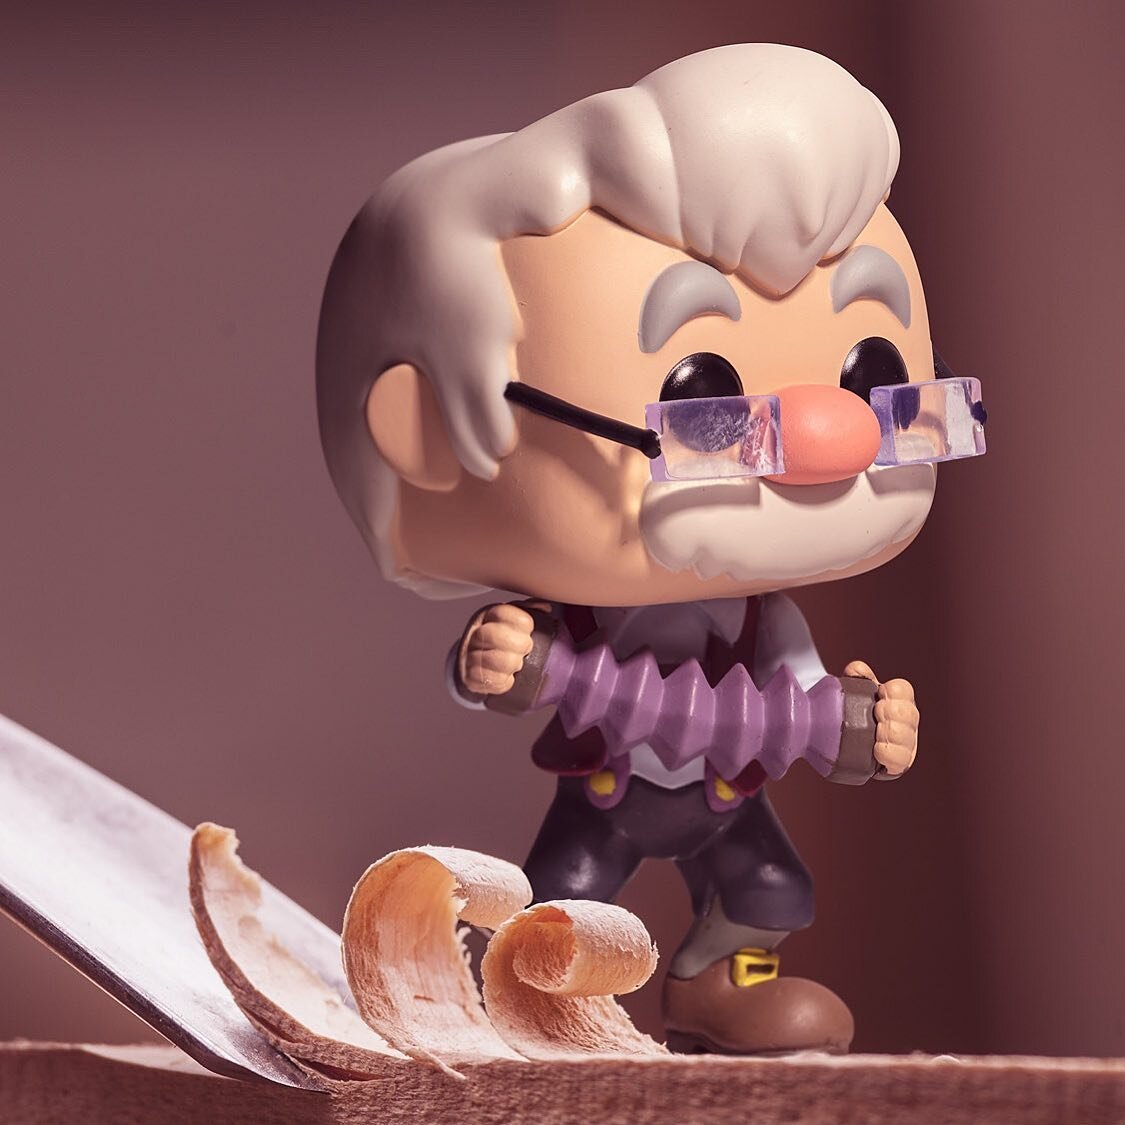 Who&rsquo;s excited about next week&rsquo;s Pinocchio release? Here&rsquo;s Geppetto, latest addition to our Disney highlight section.

&mdash;&mdash;&mdash;&mdash;&mdash;&mdash;&mdash;&mdash;&mdash;&mdash;&mdash;
🍽 @darksidepoa
📸 @darksidegallerie